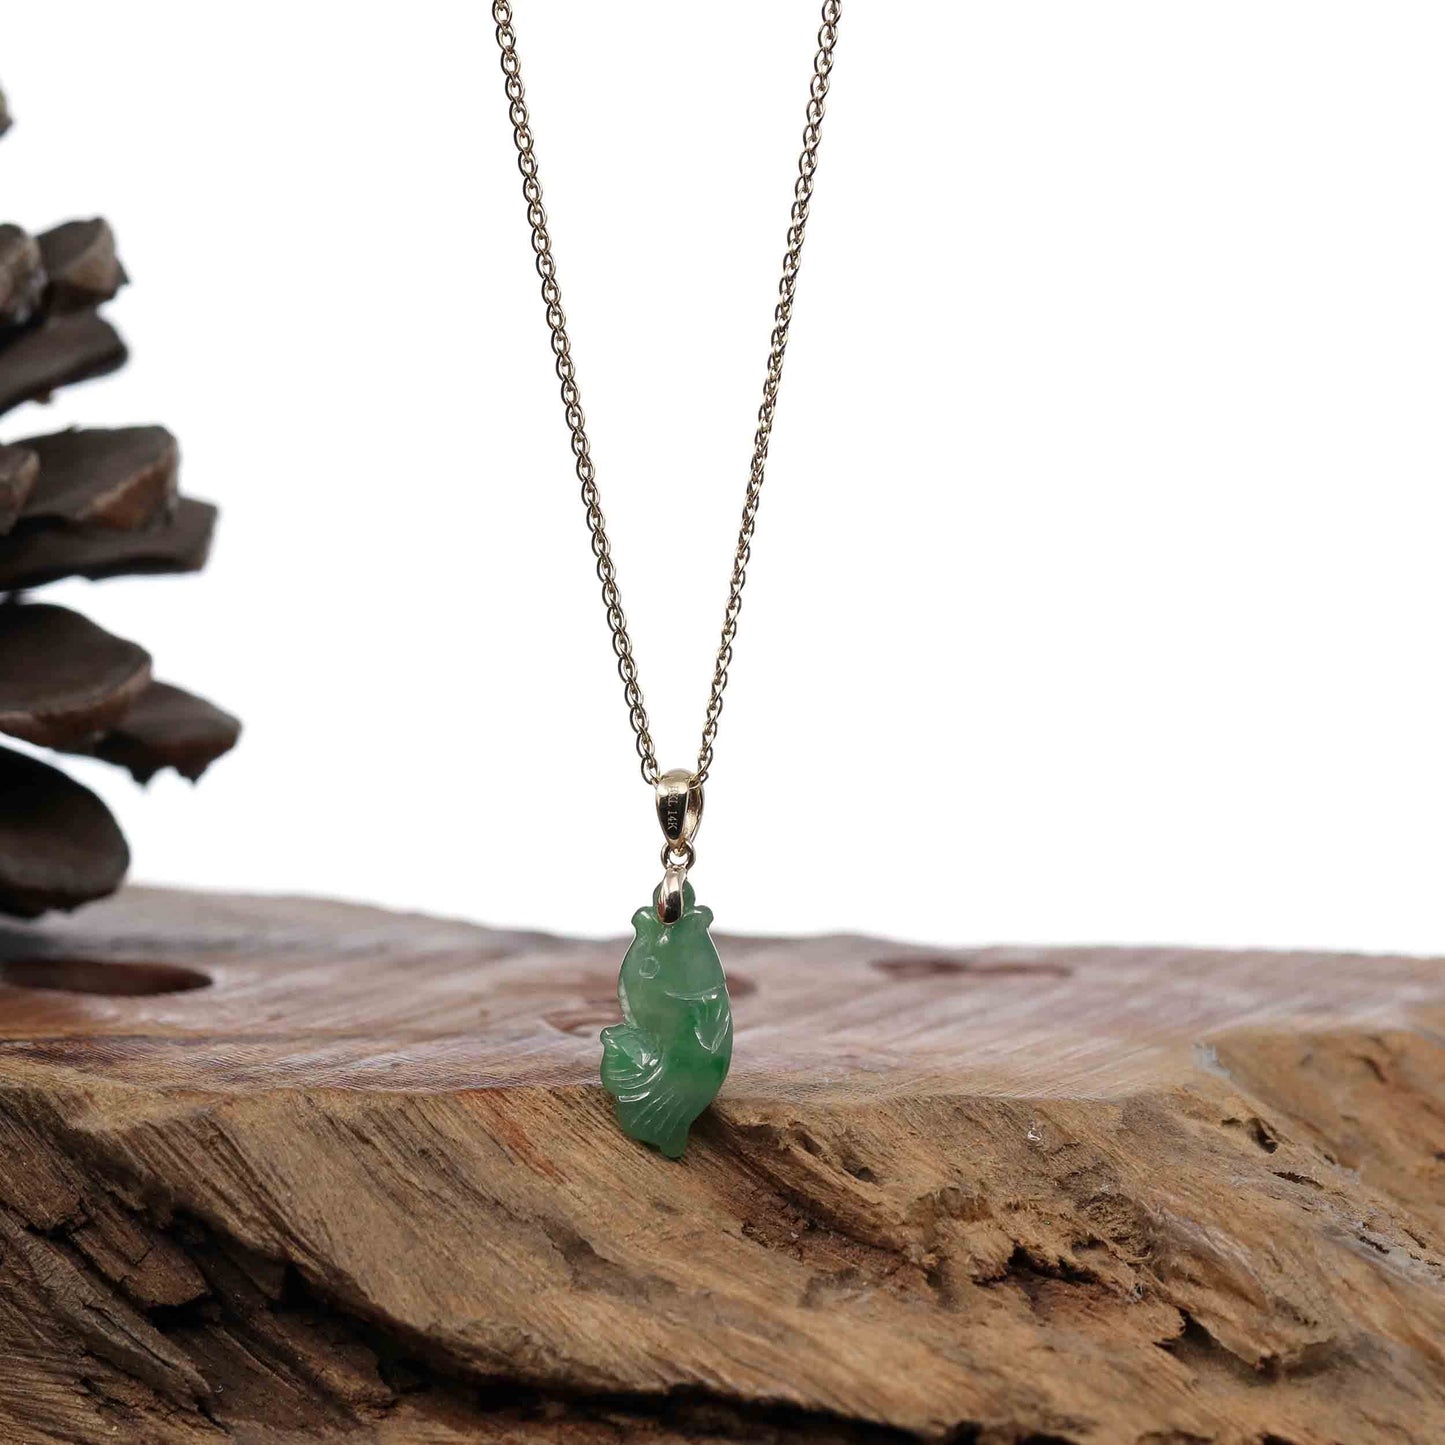 RealJade® Co. "Prosperity Every Year" Lucky Fish Carving Pendant Necklace Natural Green Jadeite Jade